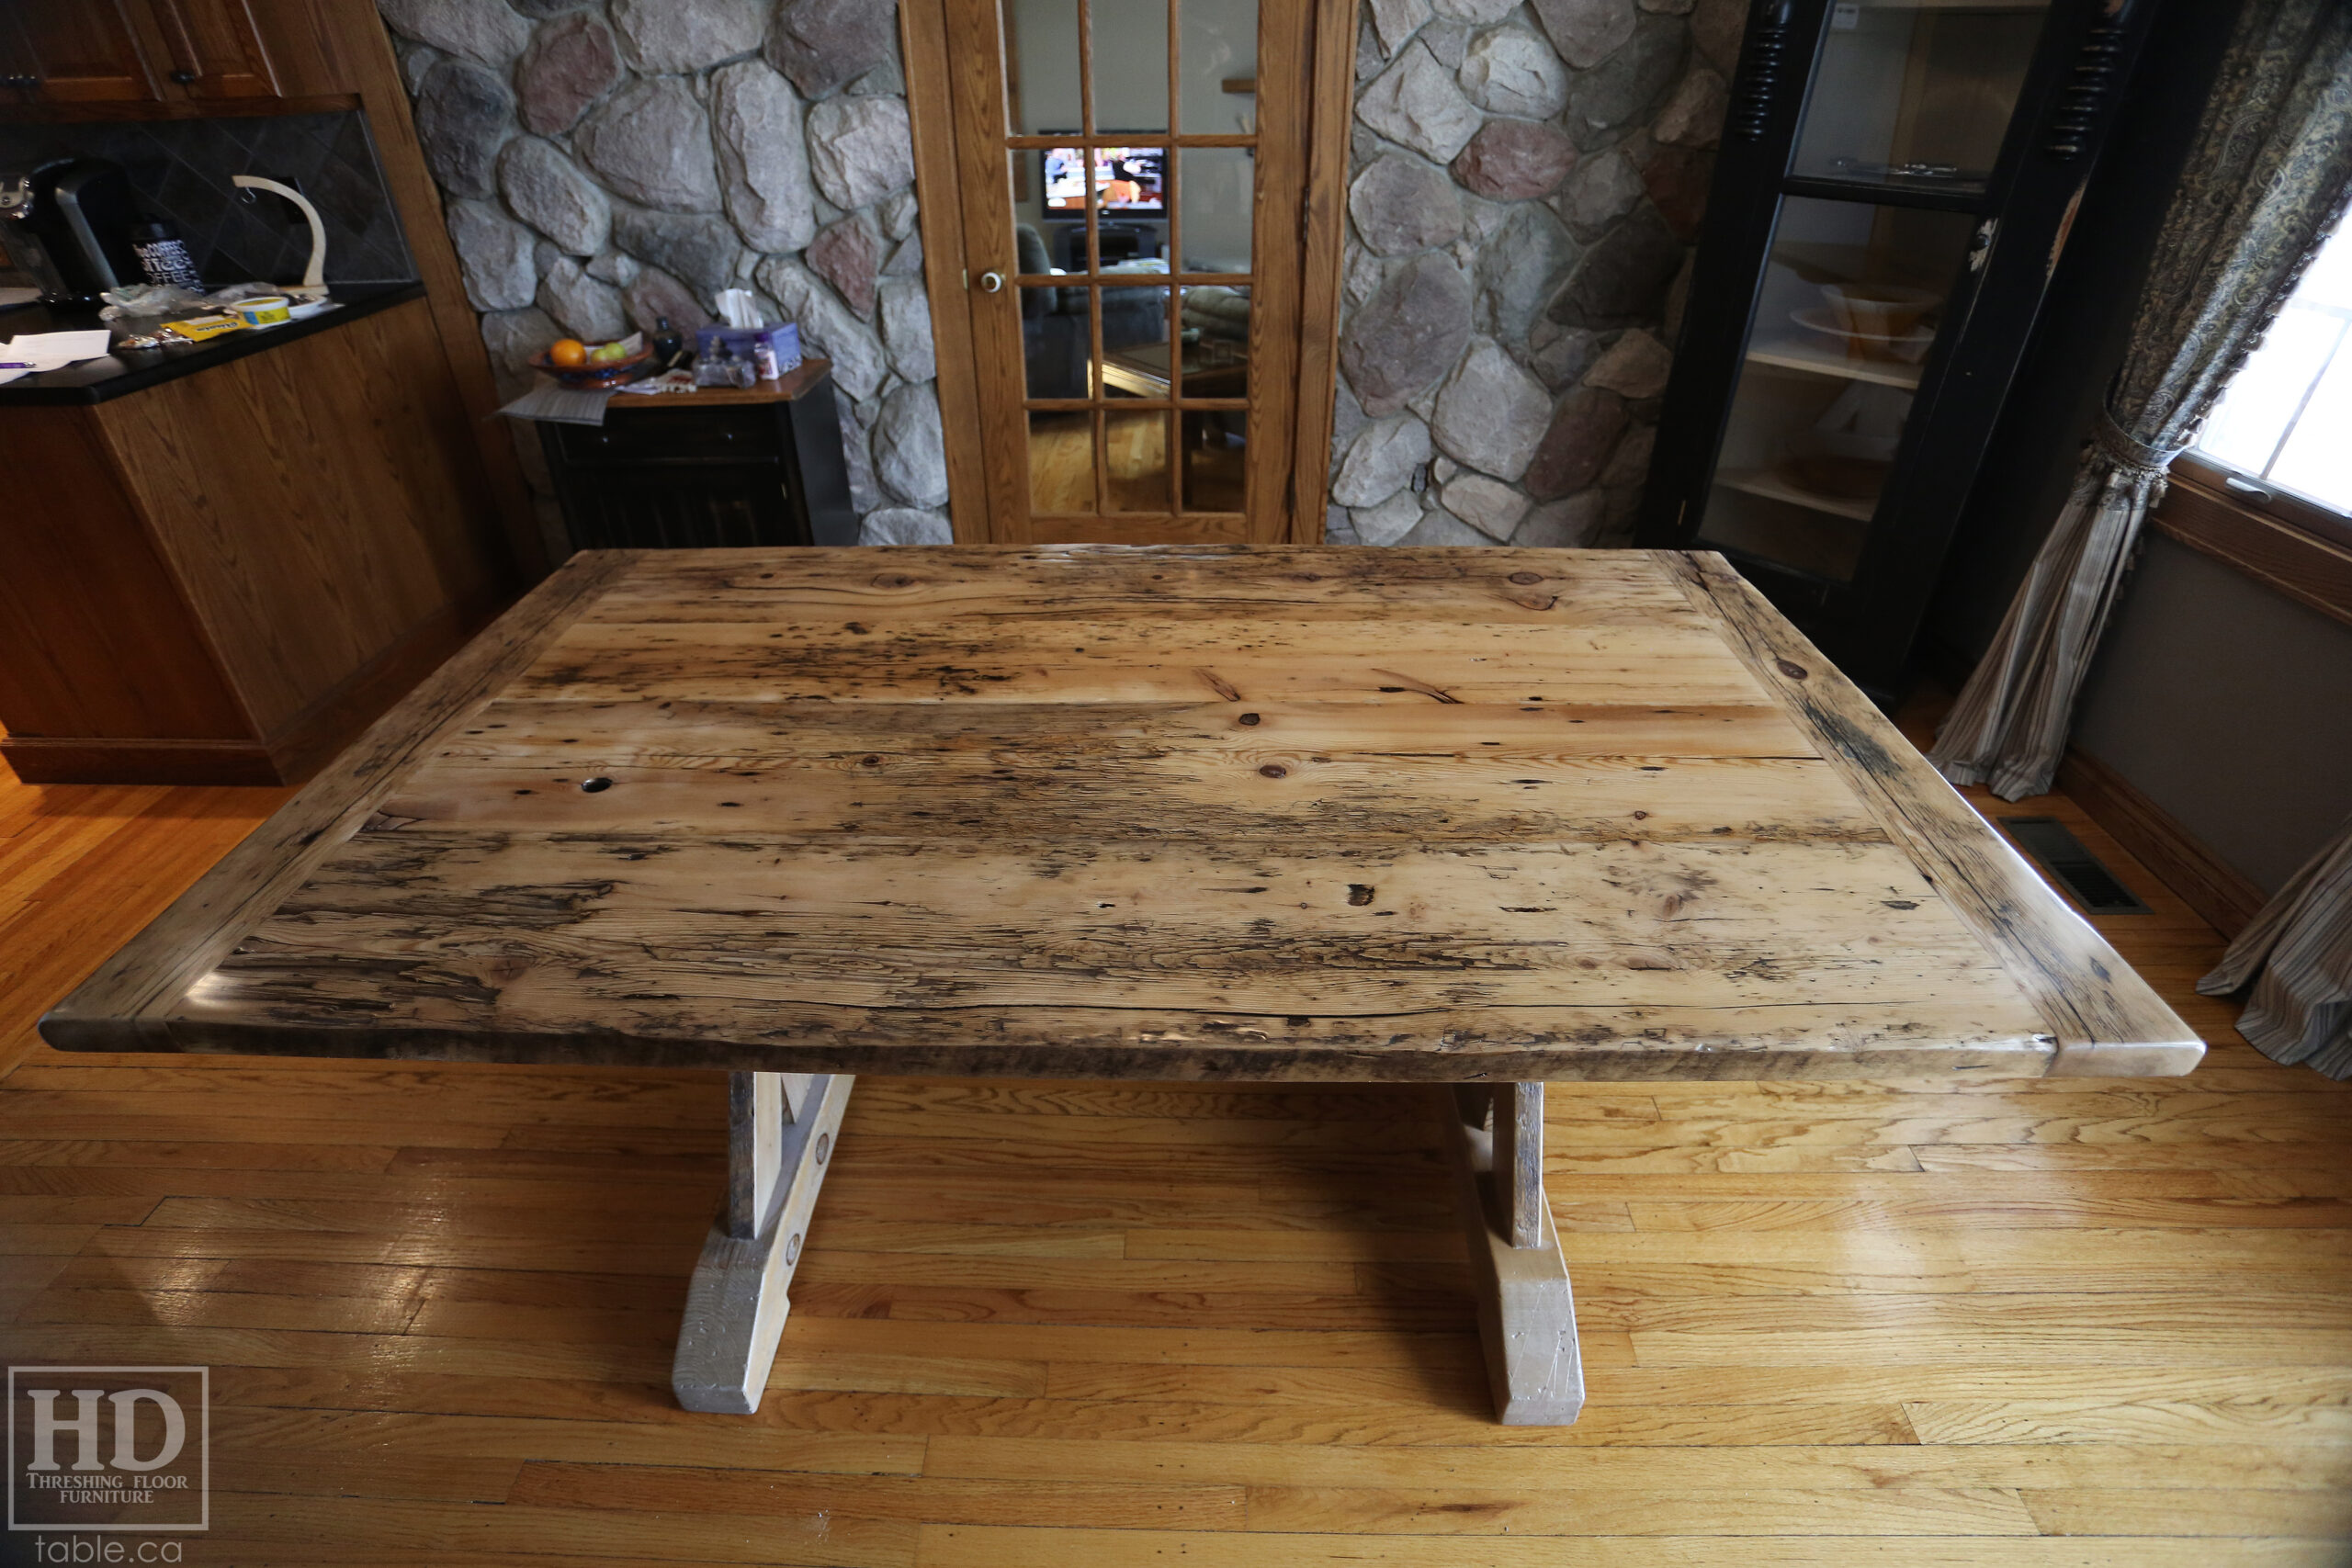 Grey Reclaimed Wood Table with Sawbuck Base by HD Threshing Floor Furniture / www.table.ca